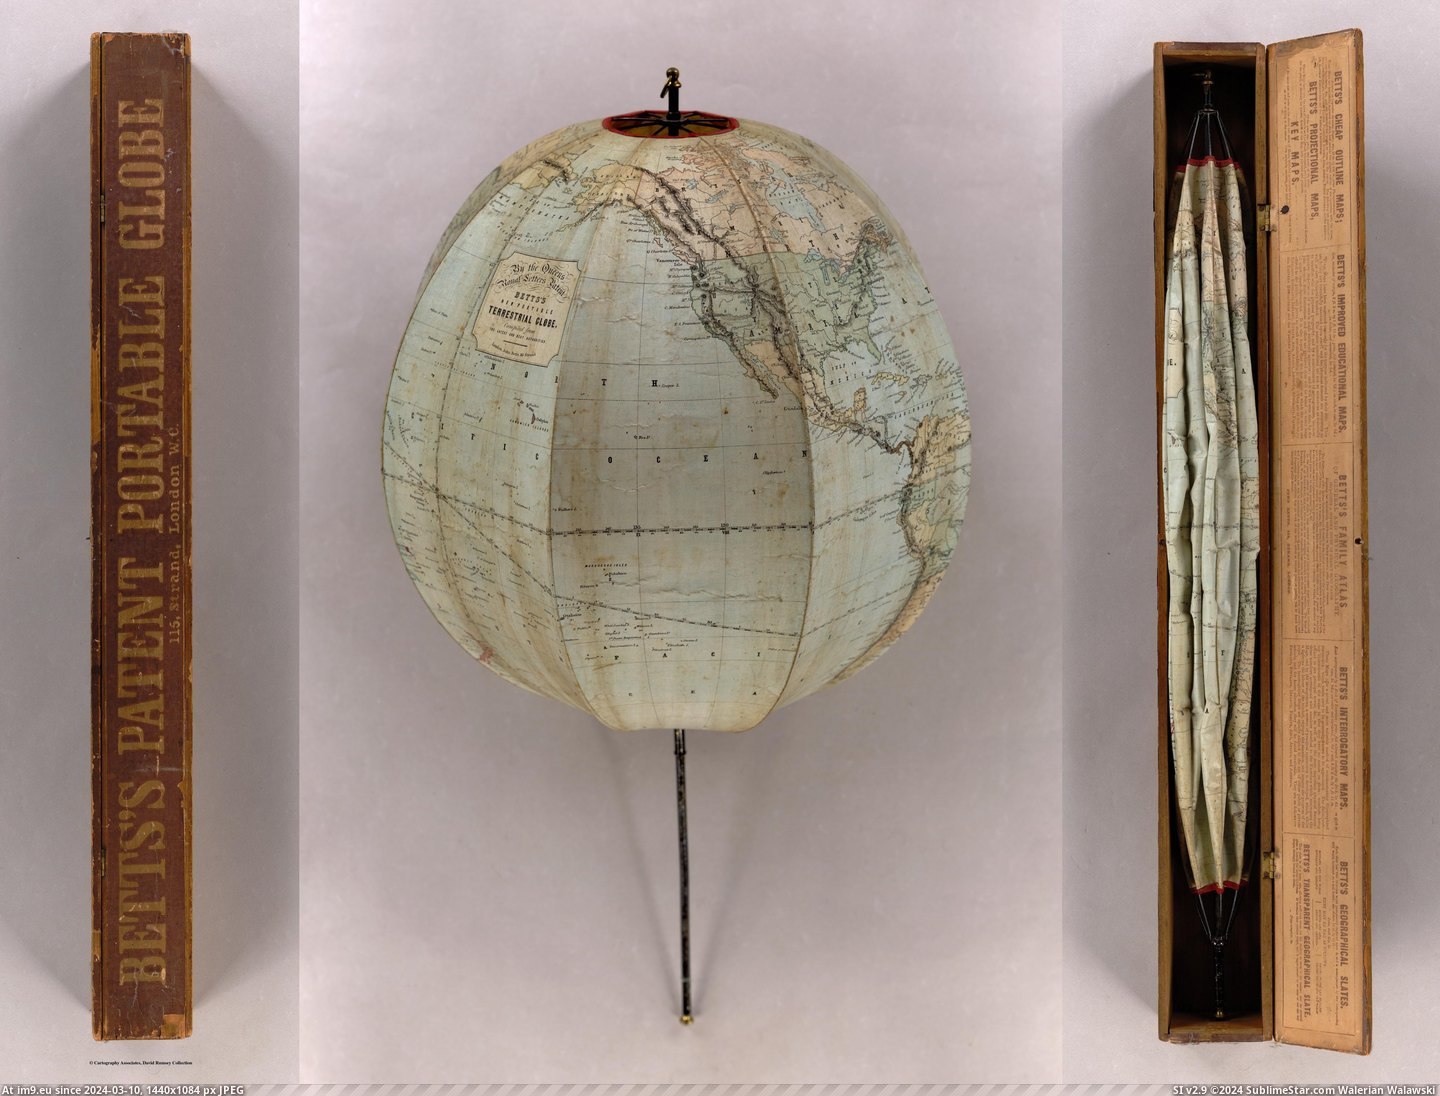 #John #Globe #Betts #Portable #Foldable [Mapporn] A foldable, portable globe from 1852. Made by John Betts [3936x2976] Pic. (Image of album My r/MAPS favs))